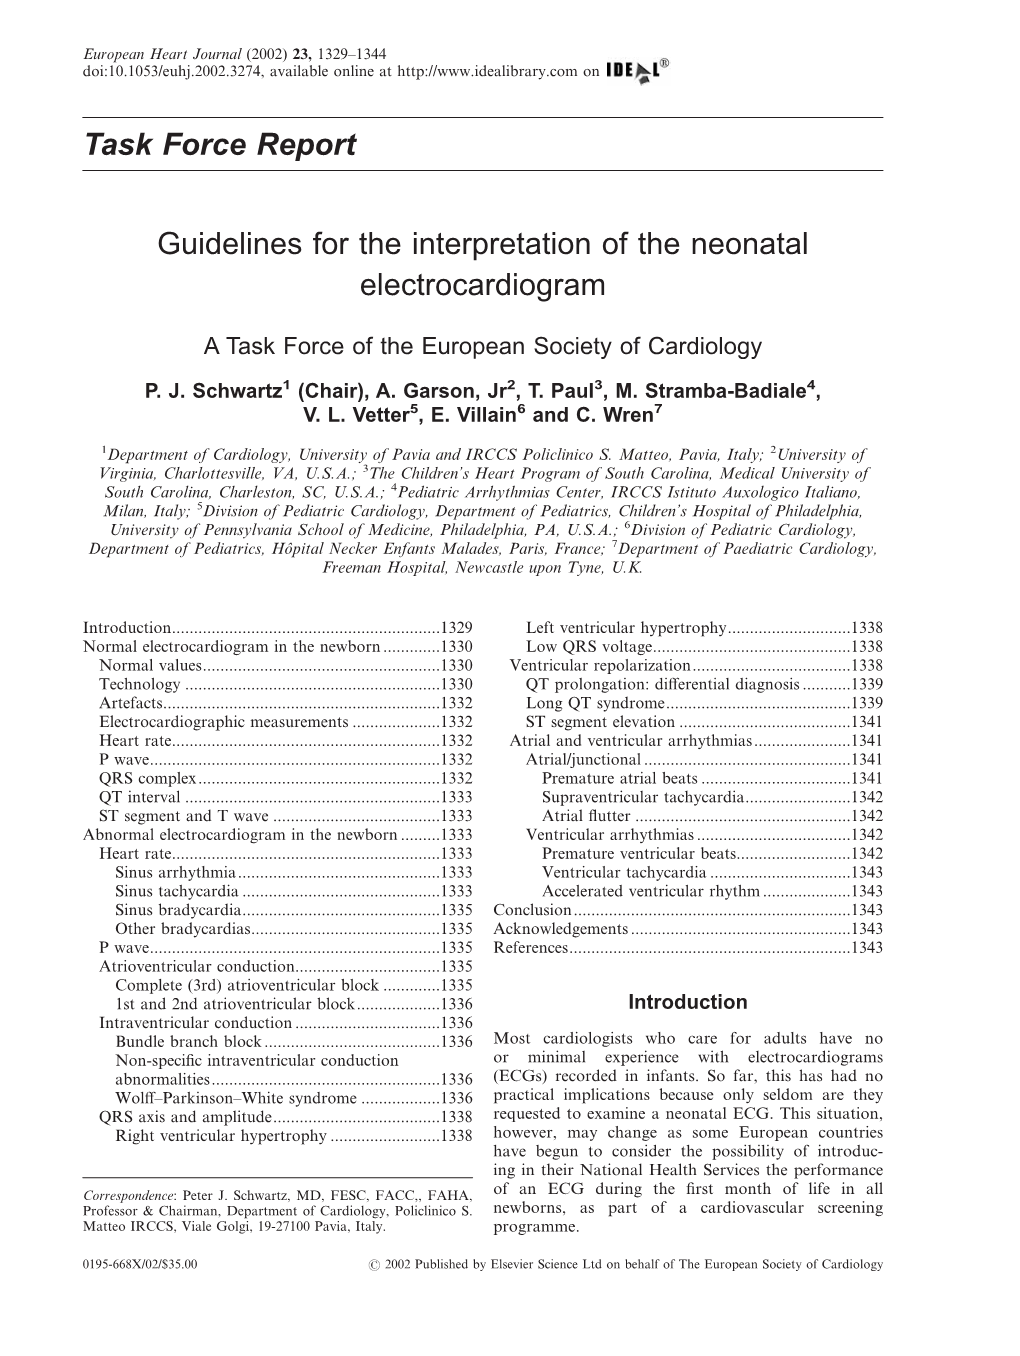 Guidelines for the Interpretation of the Neonatal Electrocardiogram